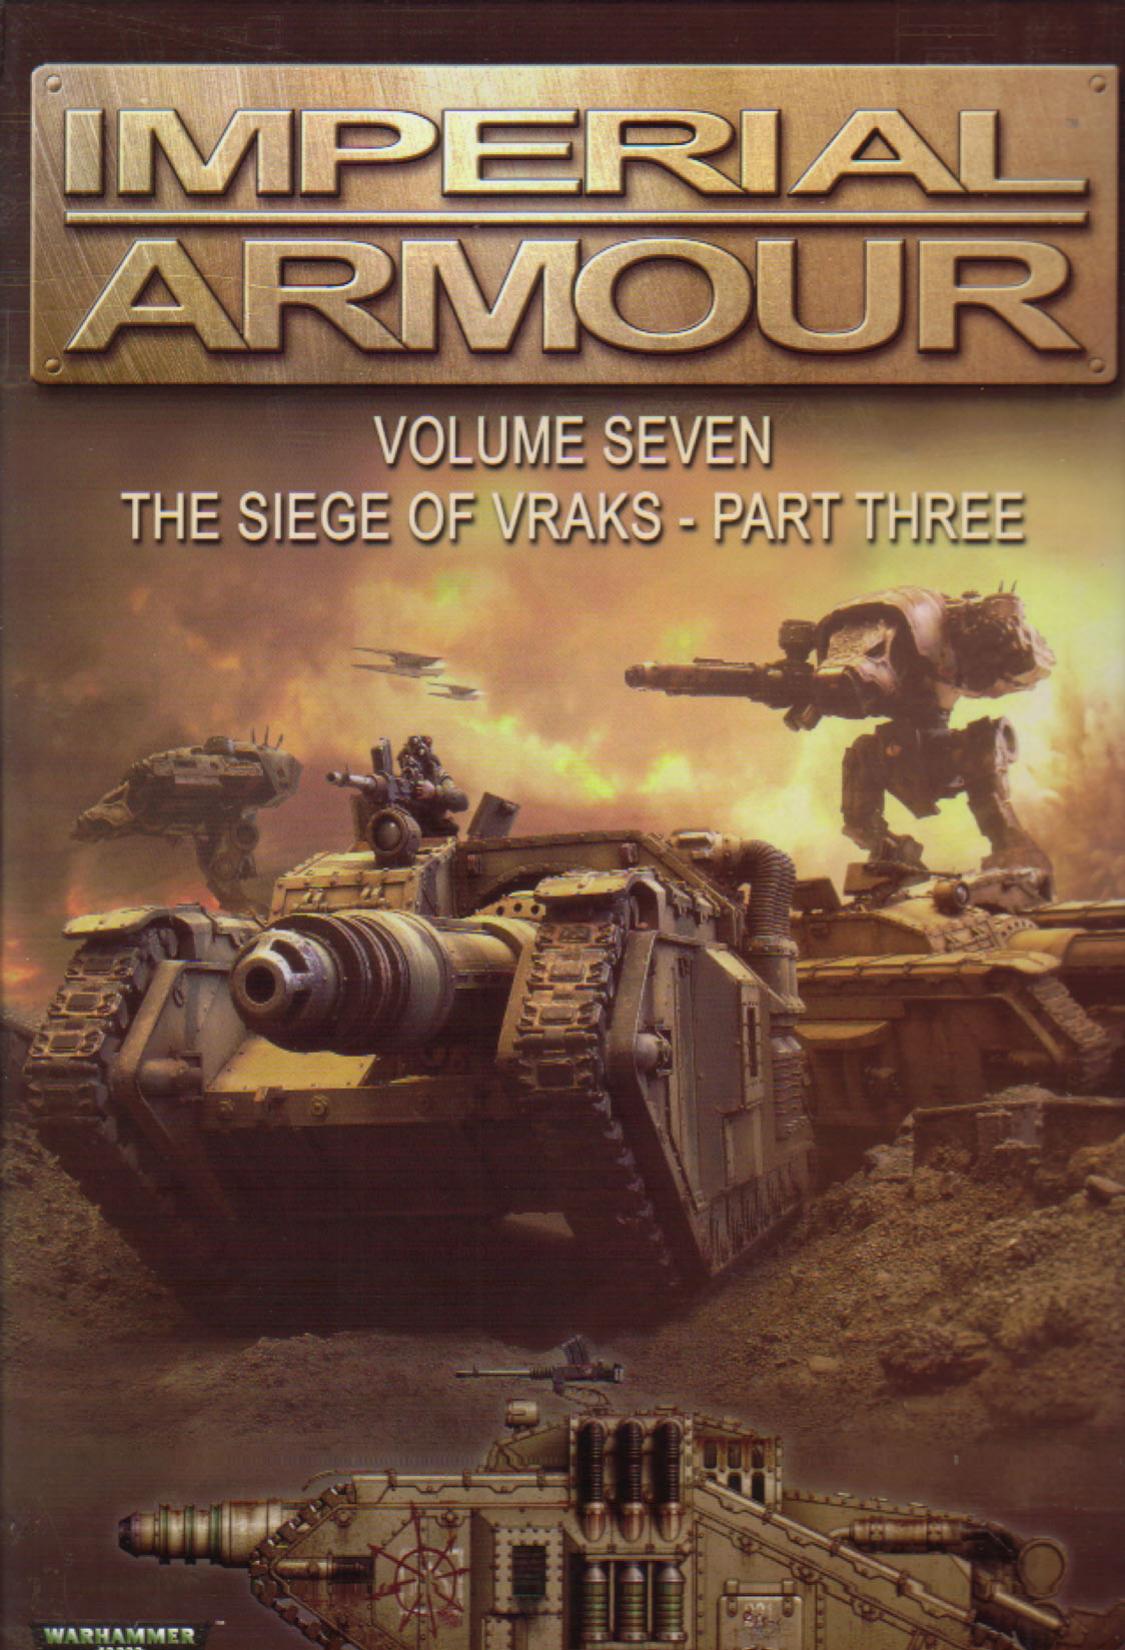 Imperial Armour Vol 7 The Siege of Vraks Part 3